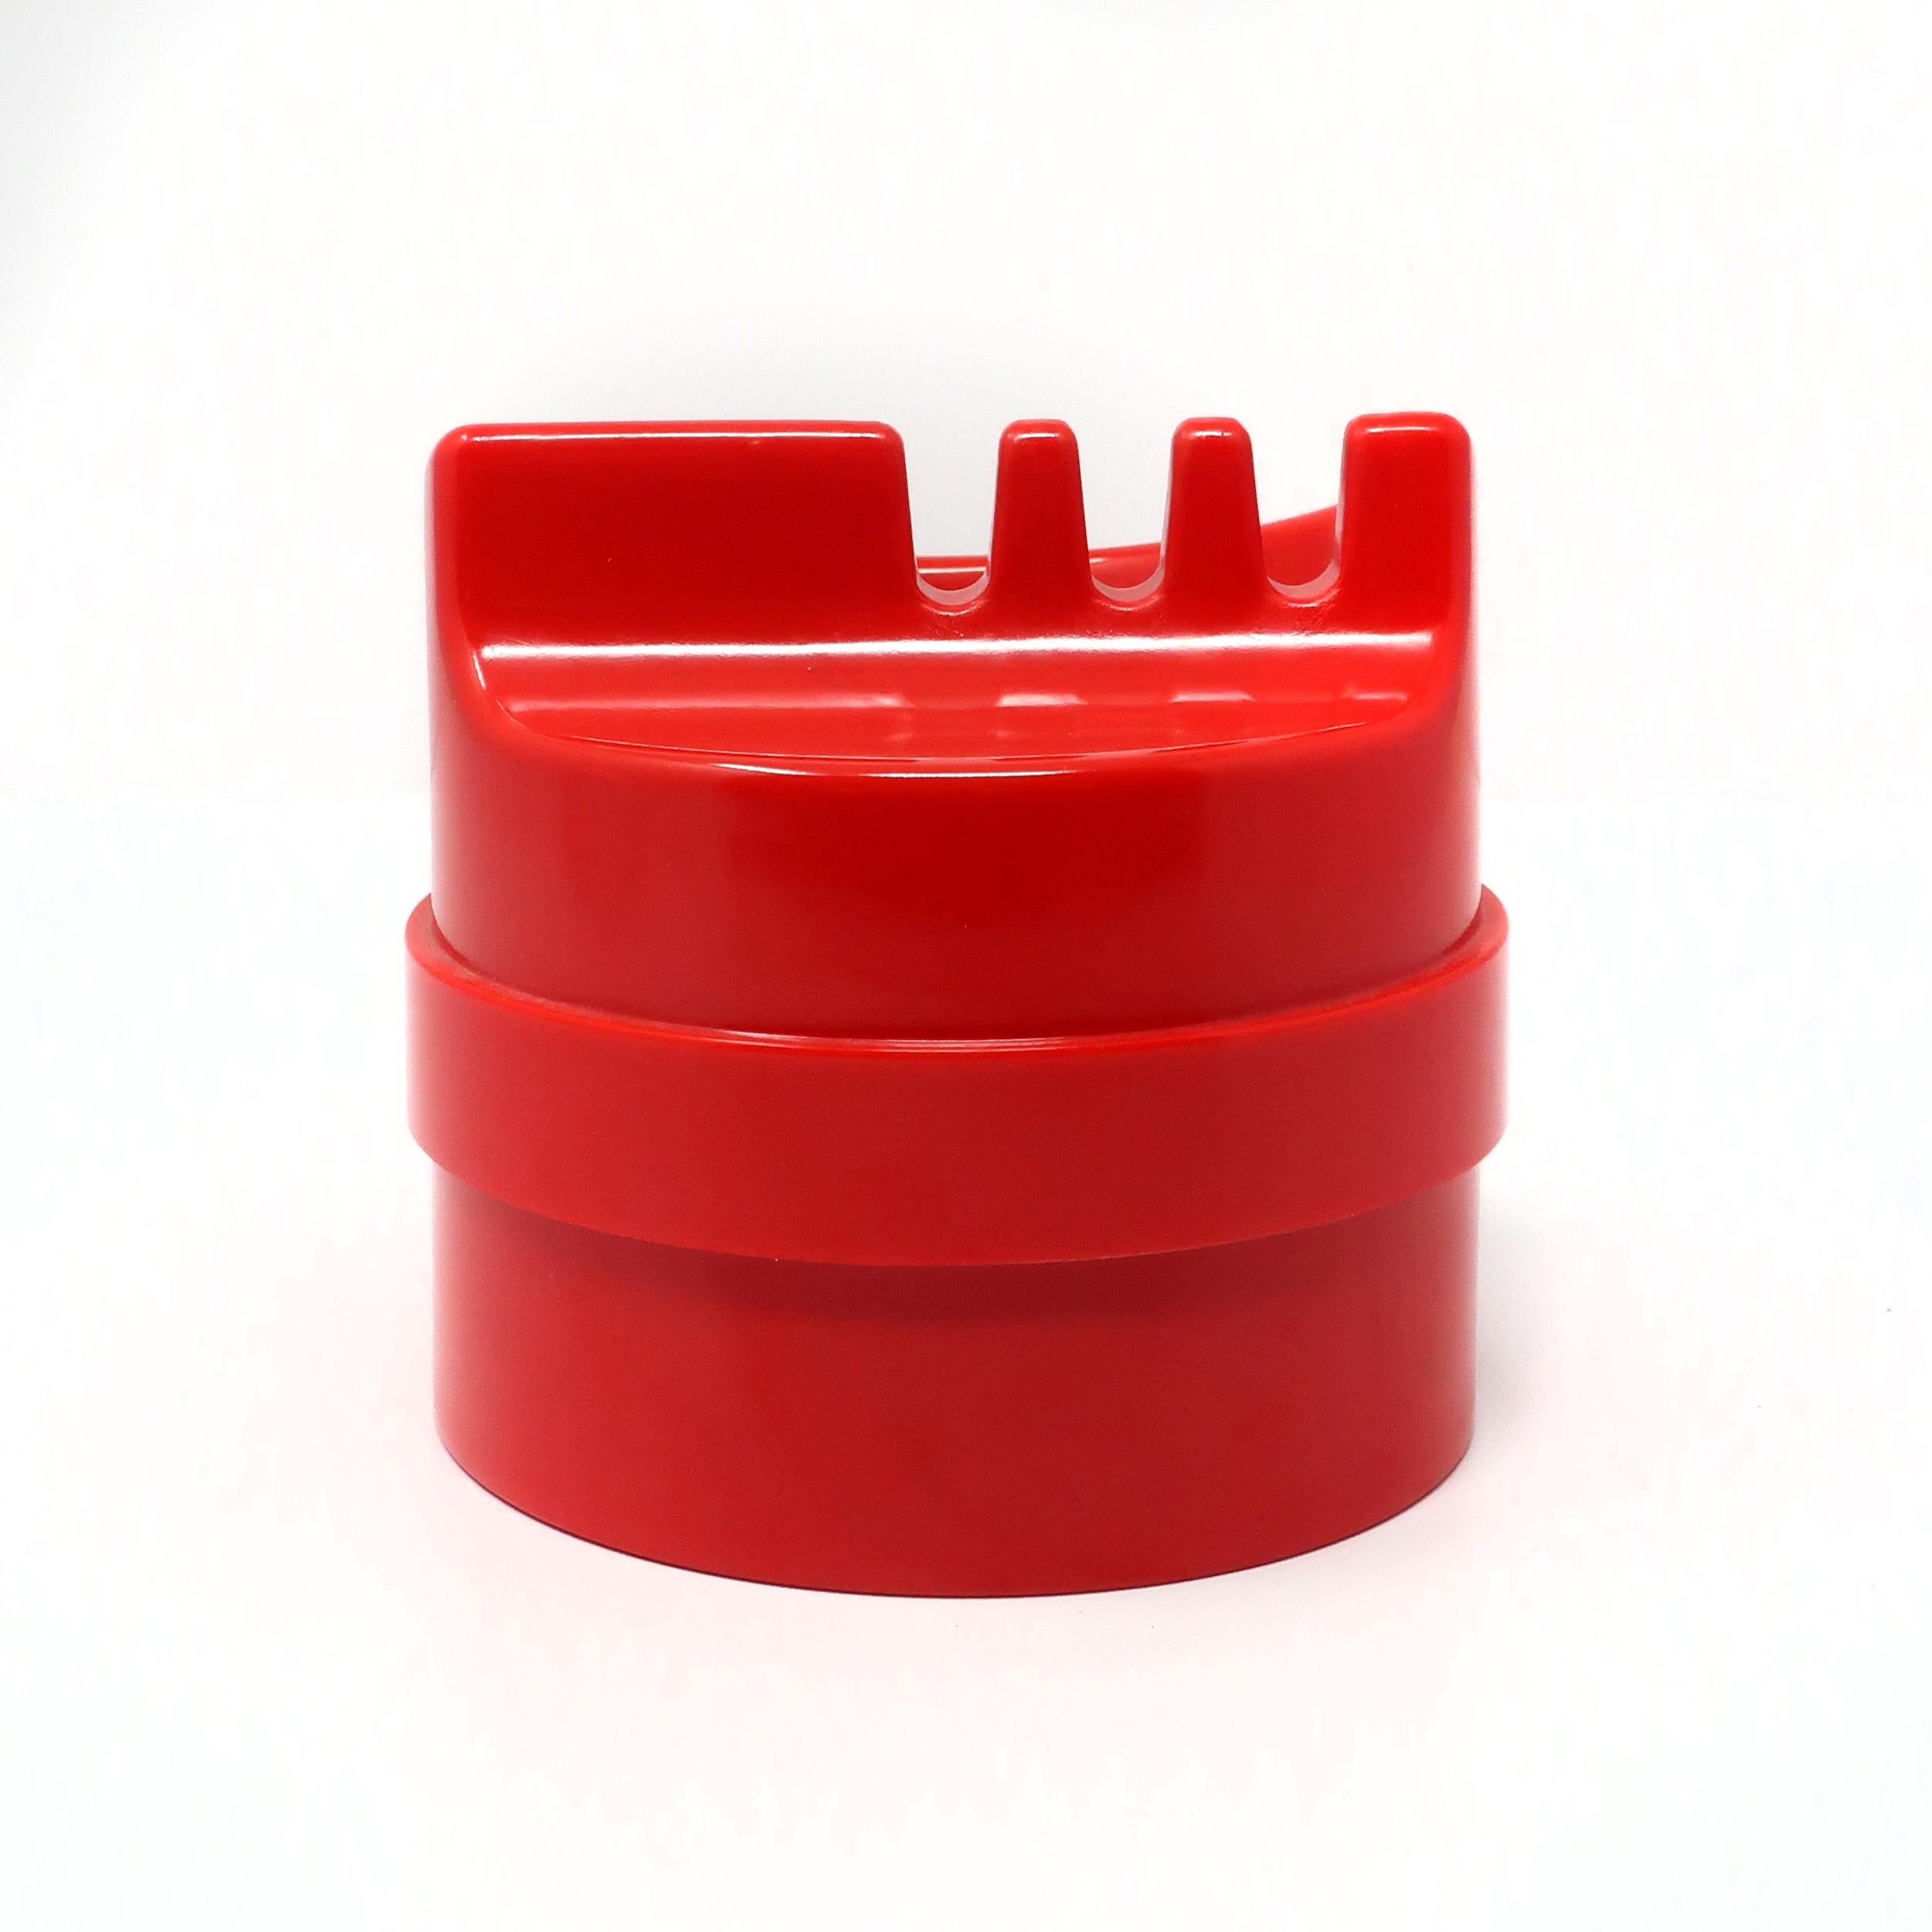 Originally designed in 1970 and produced by Kartell in 1973 two years after designer Joe Colombo's death, the Kartell 4630 Roto/Rotocenere ashtray is Colombo at his finest. Red plastic construction with beautiful lines and a thoughtful design that